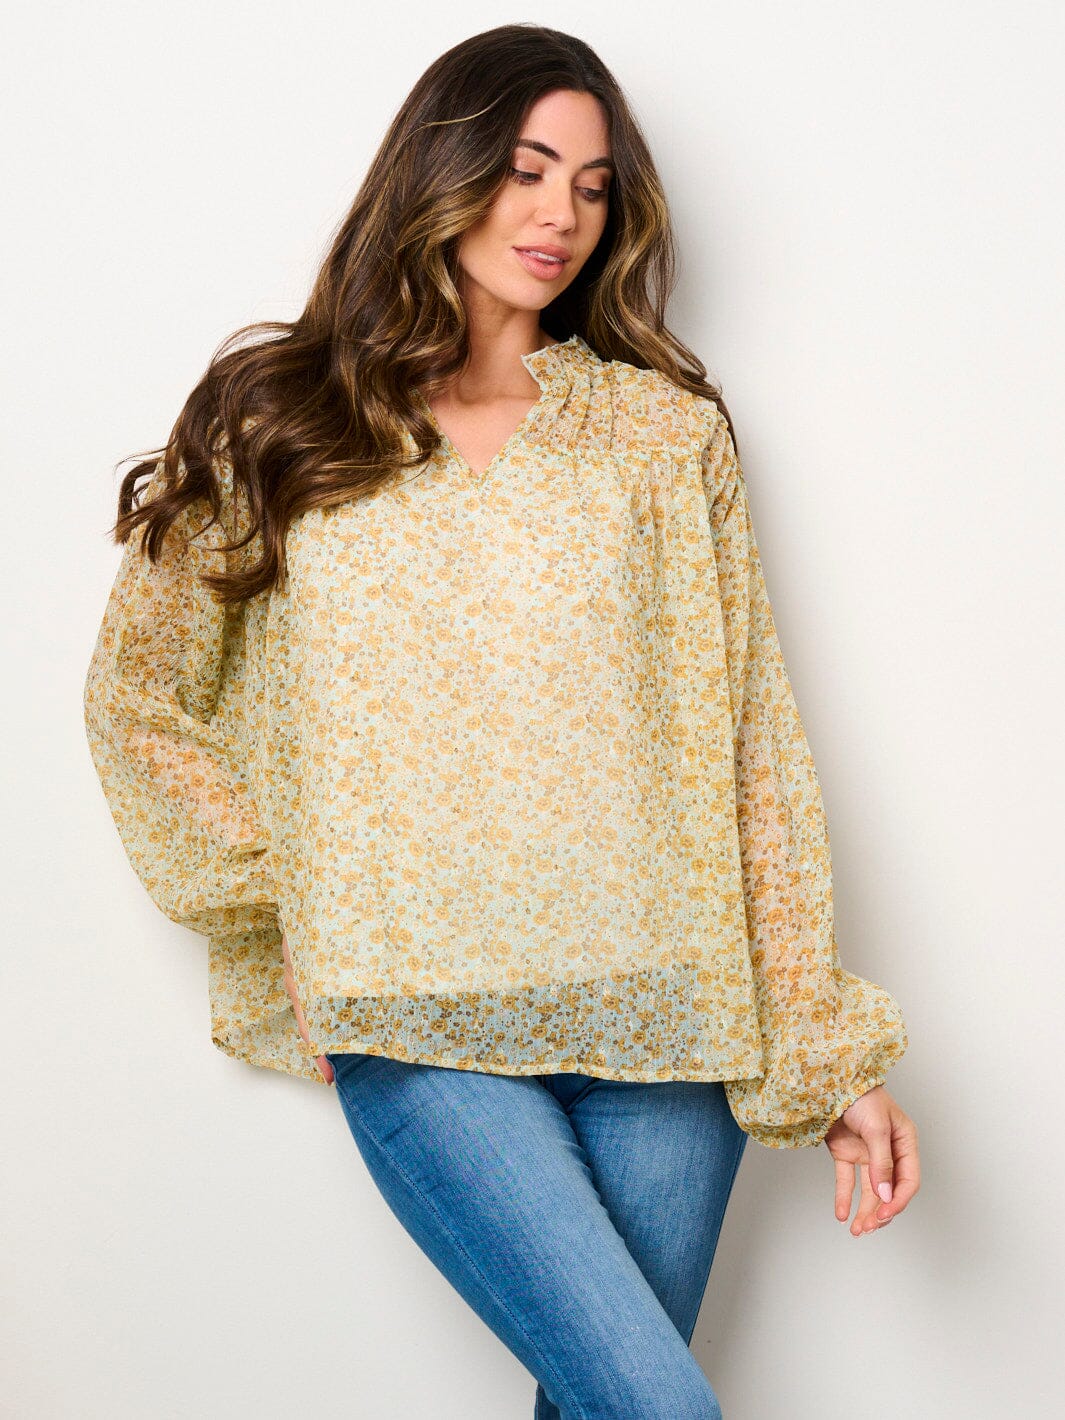 WOMEN'S LONG SLEEVE V-NECK RUFFLE FLORAL BLOUSE TOP ...